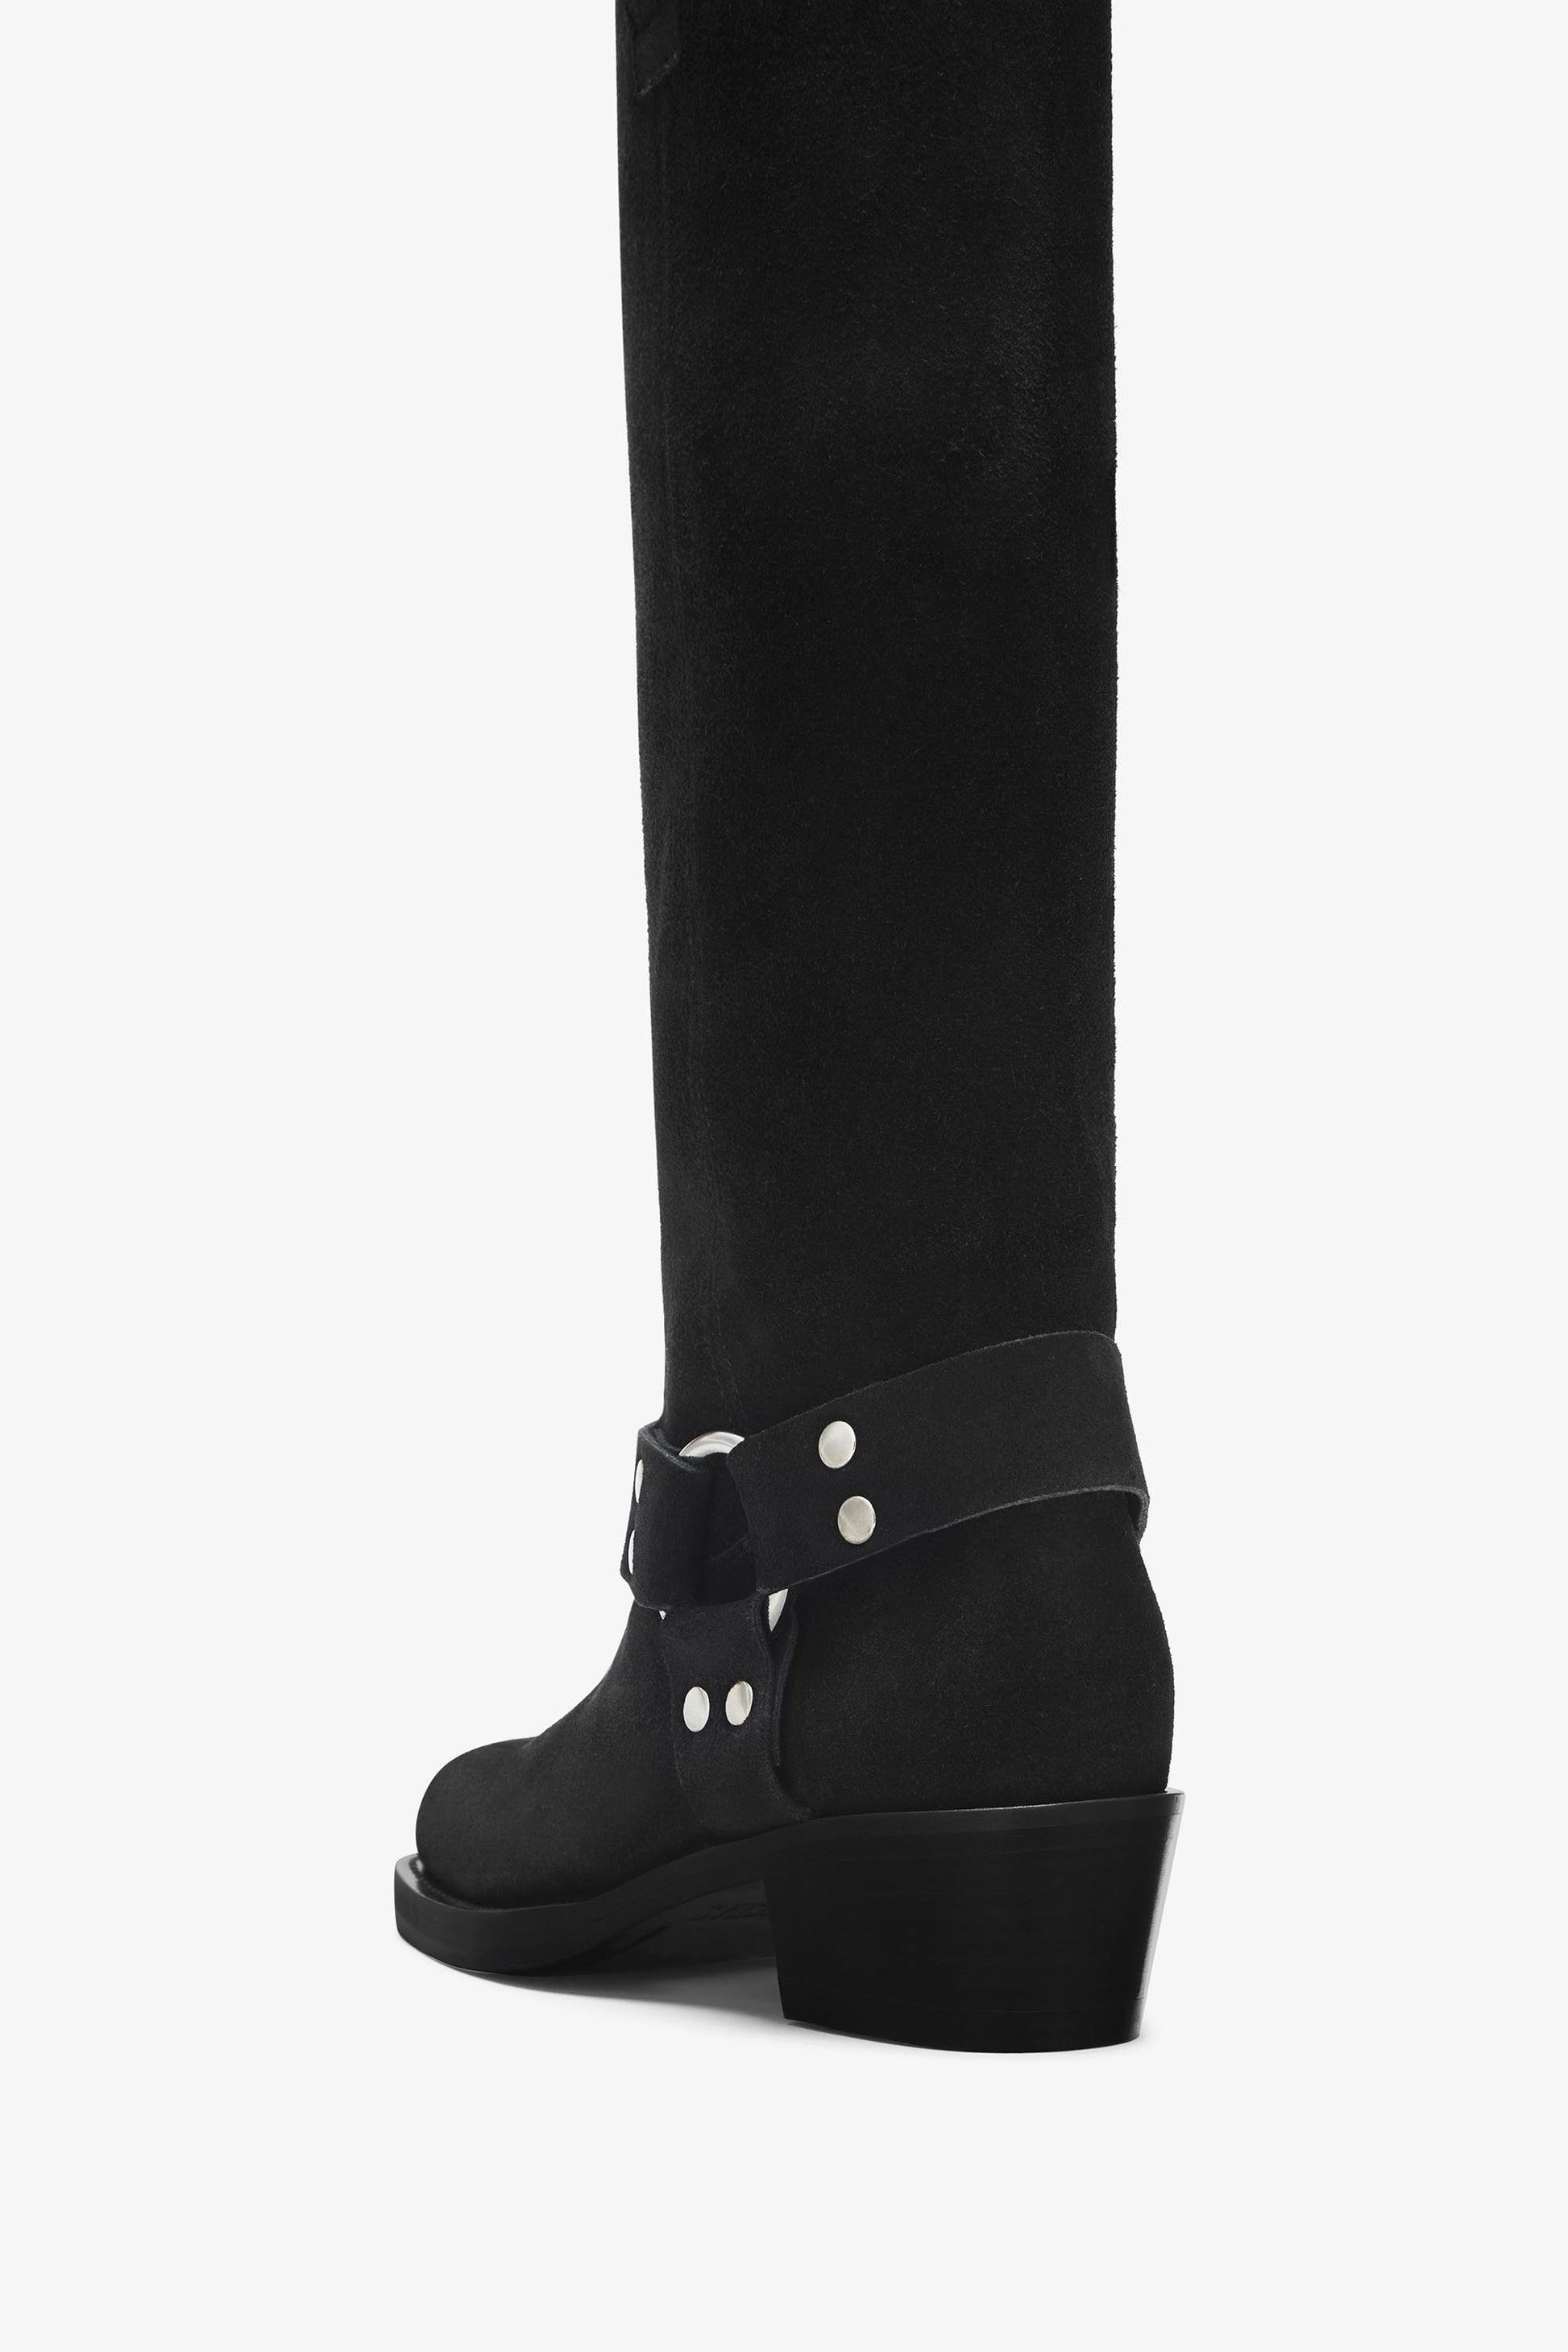 Black brushed leather boot